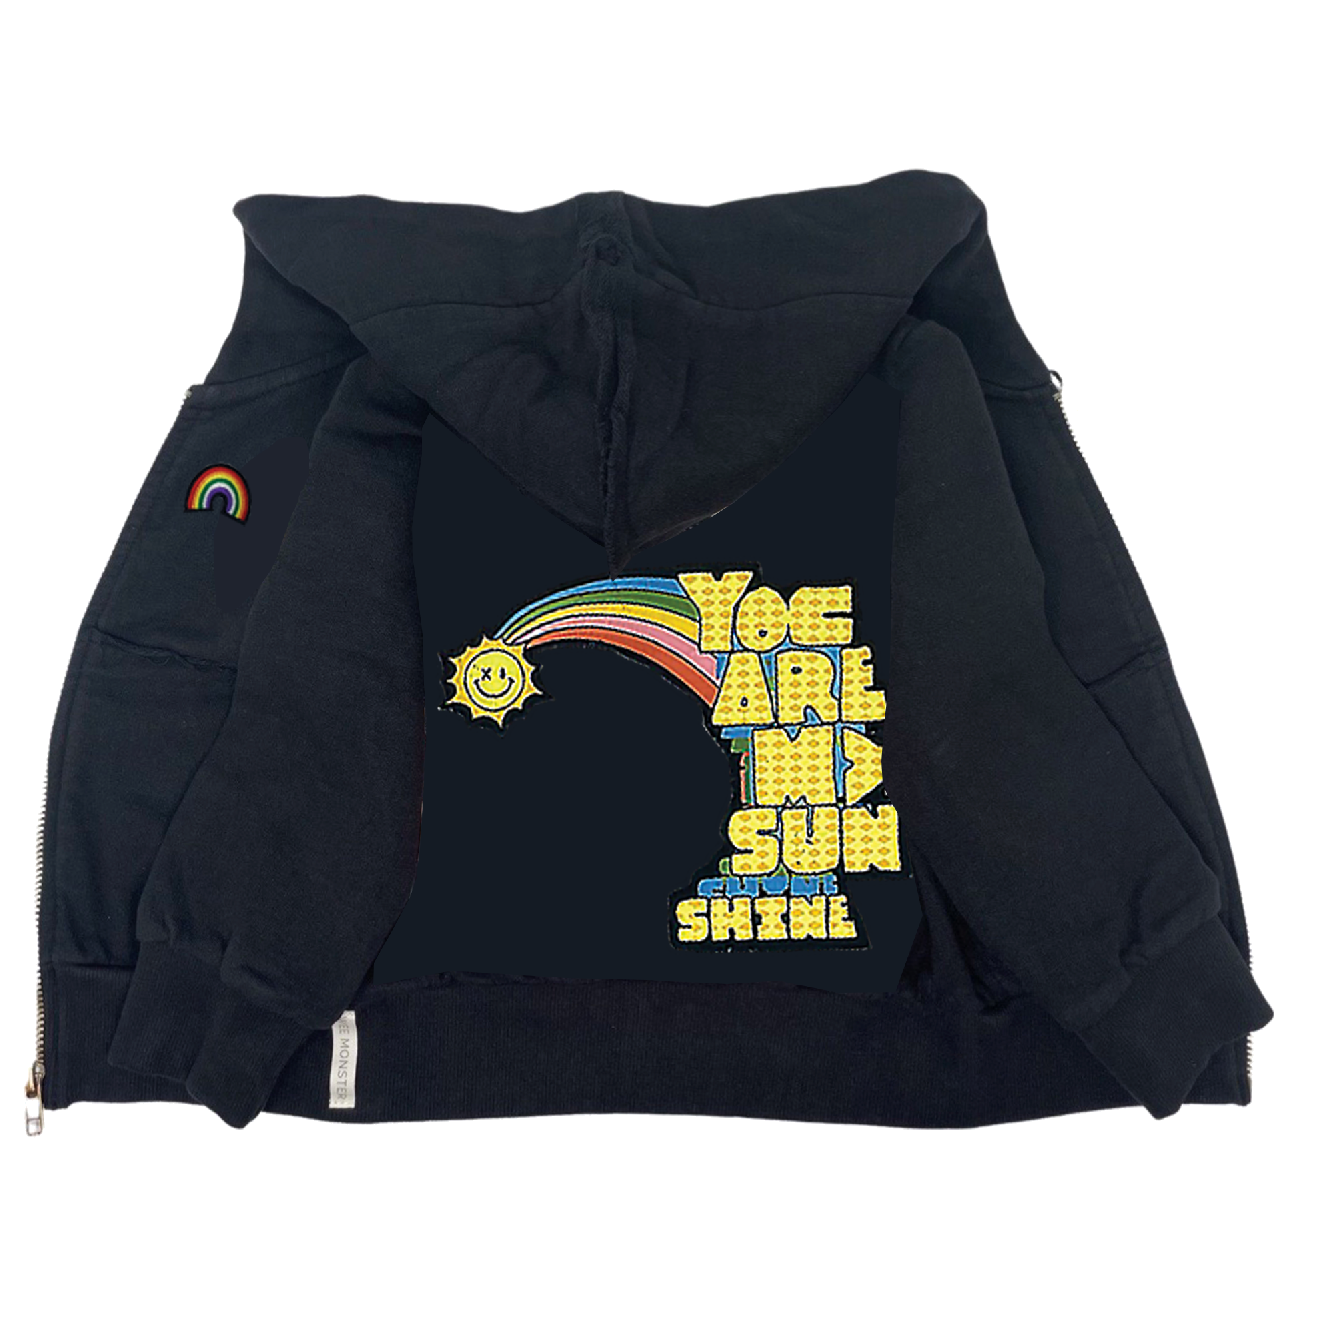 You Are My Sunshine Black Zip Hoodie - Unisex for Boys and Girls